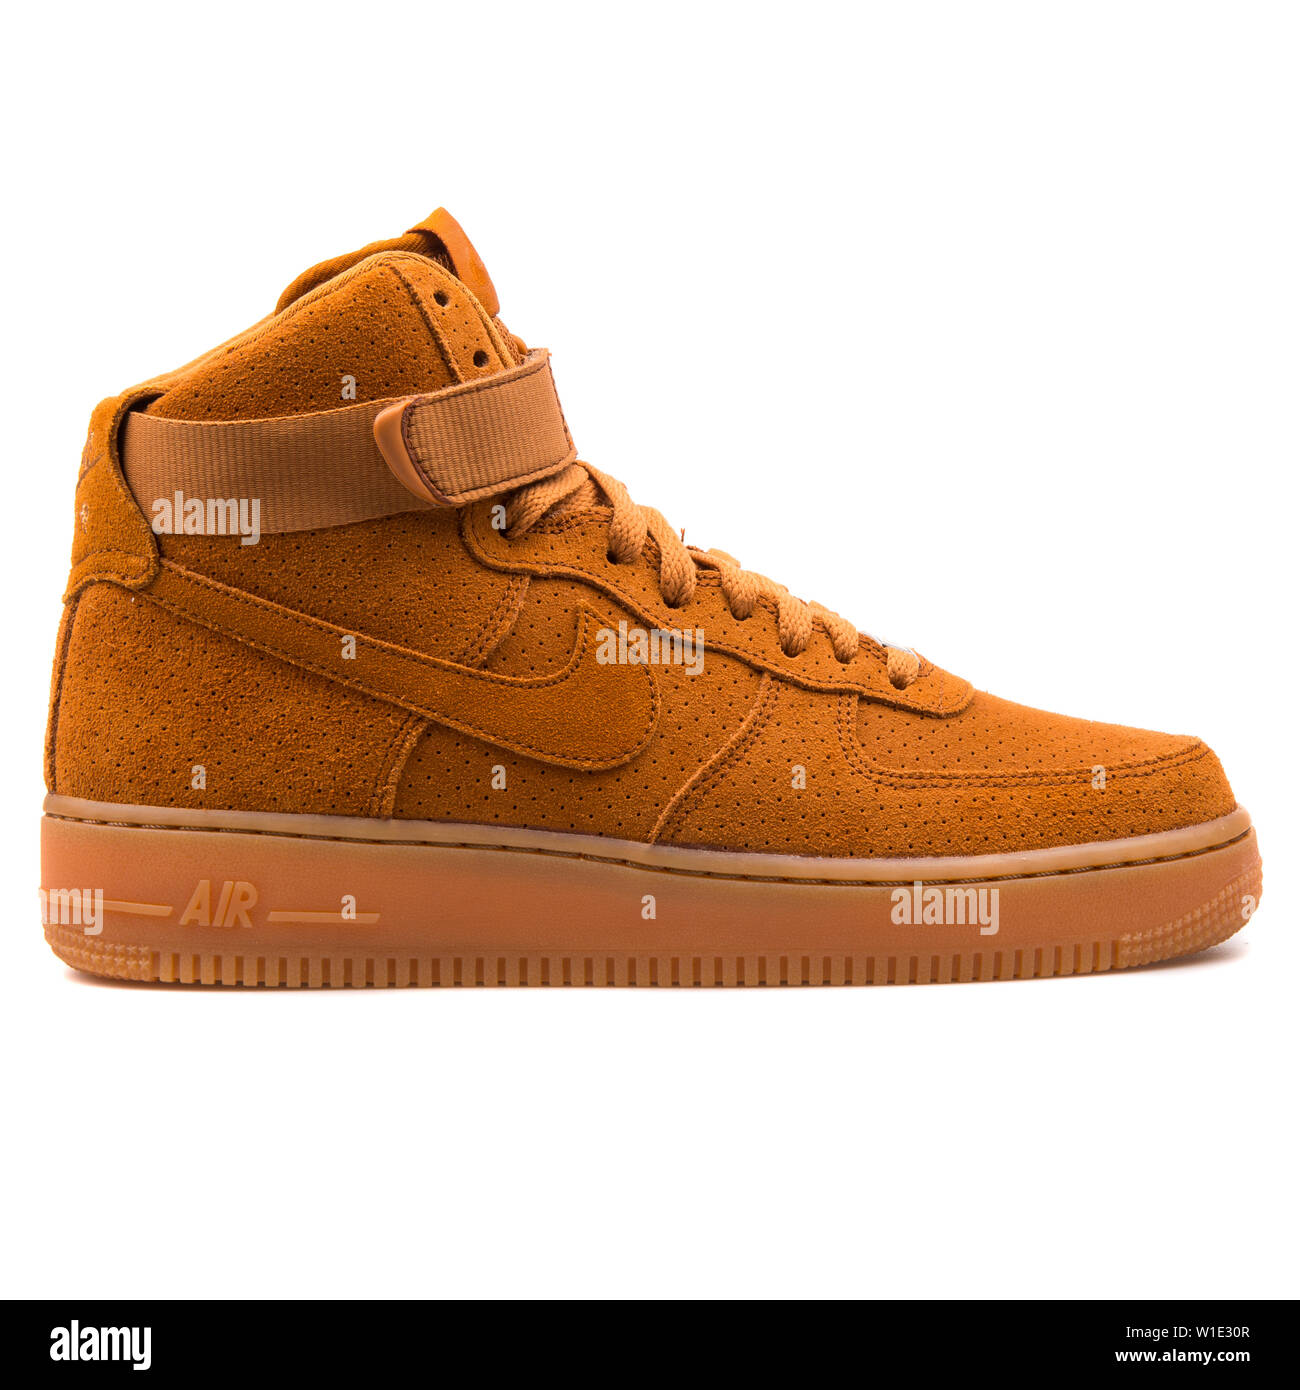 VIENNA, AUSTRIA - AUGUST 25, 2017: Nike Air Force 1 High Suede tawny  sneaker on white background Stock Photo - Alamy